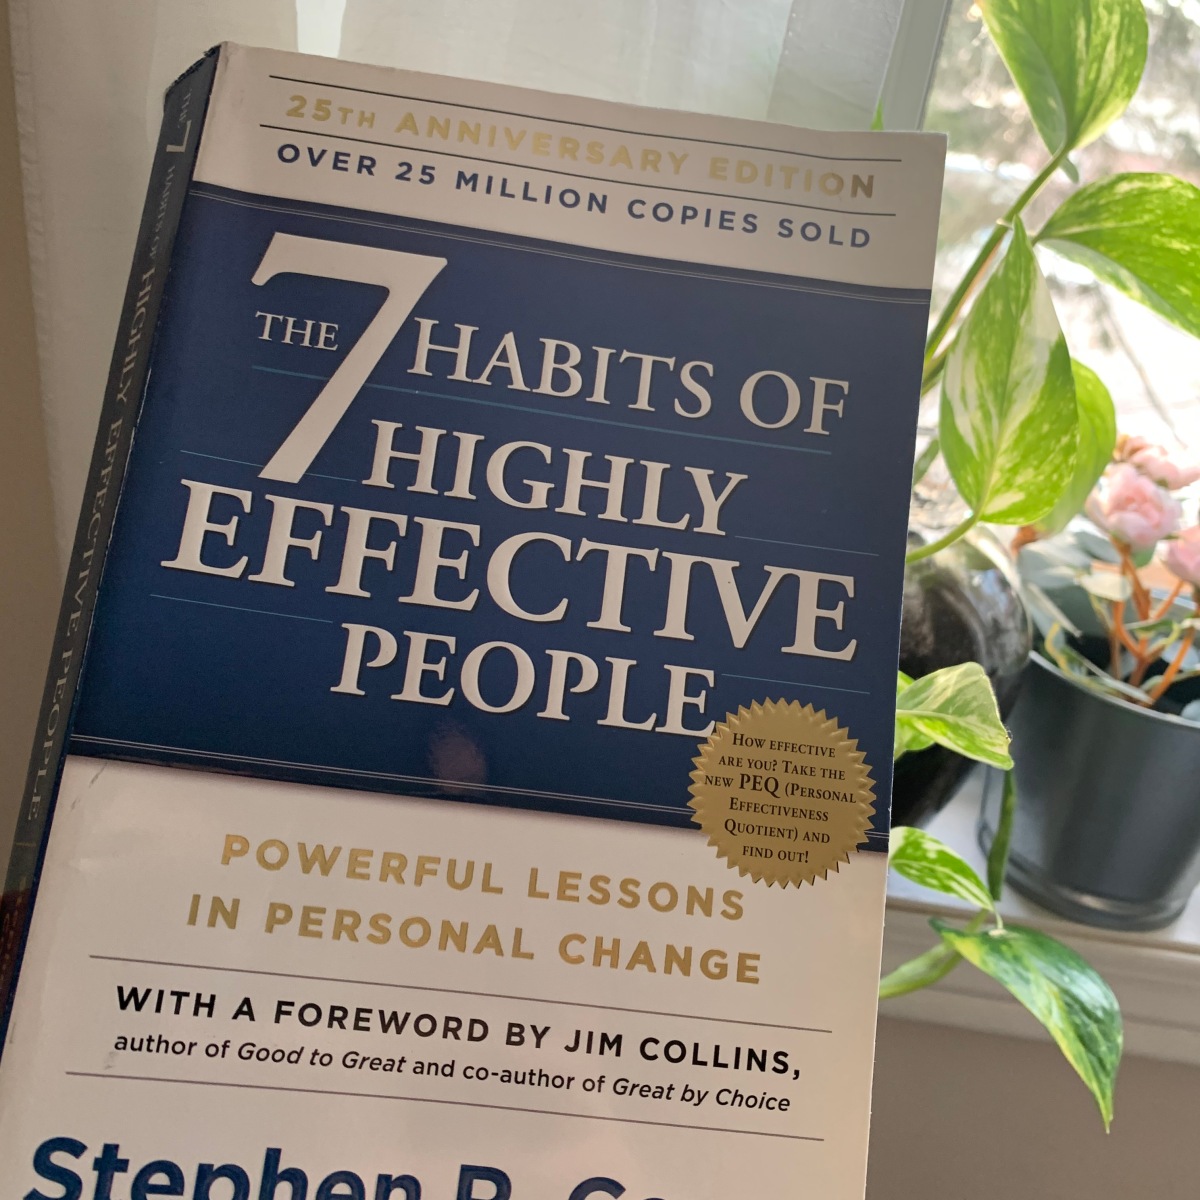 ‘The 7 Habits of Highly Effective People’ by Stephen Covey